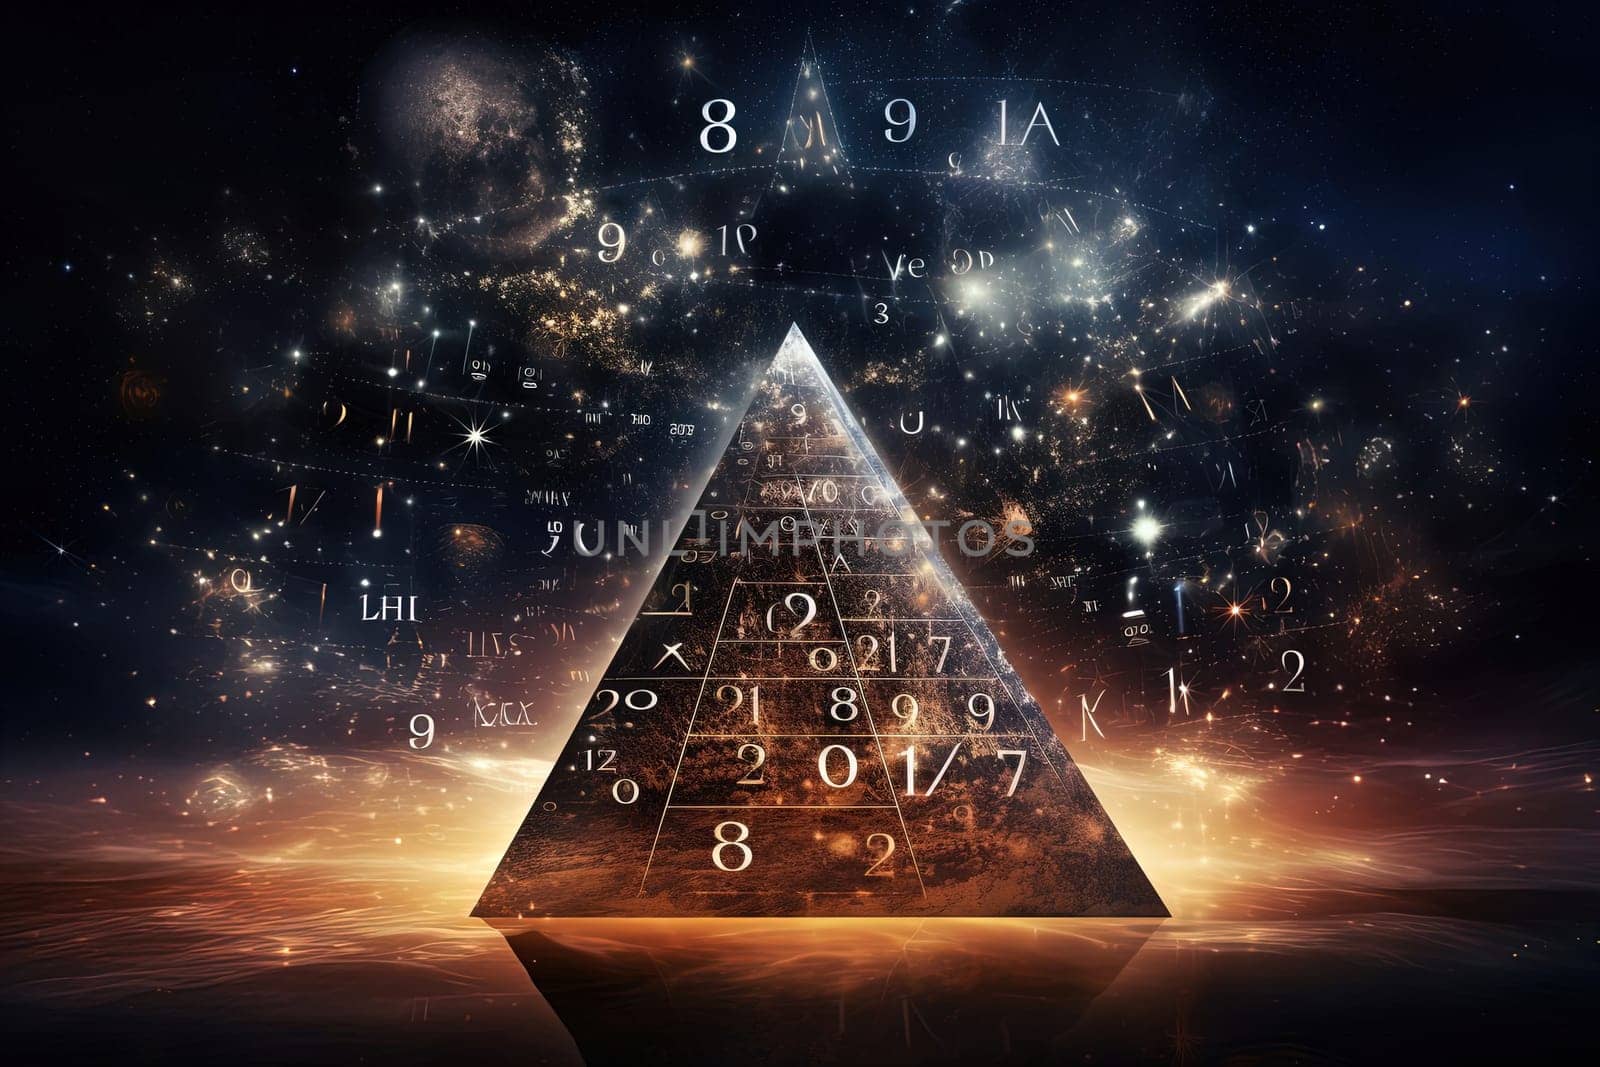 Conceptually flow of thinking, calculation, physical and mathematical formulas, numbers, letters, space, time, physical concepts, scientific research. Abstract background with pyramid closeup